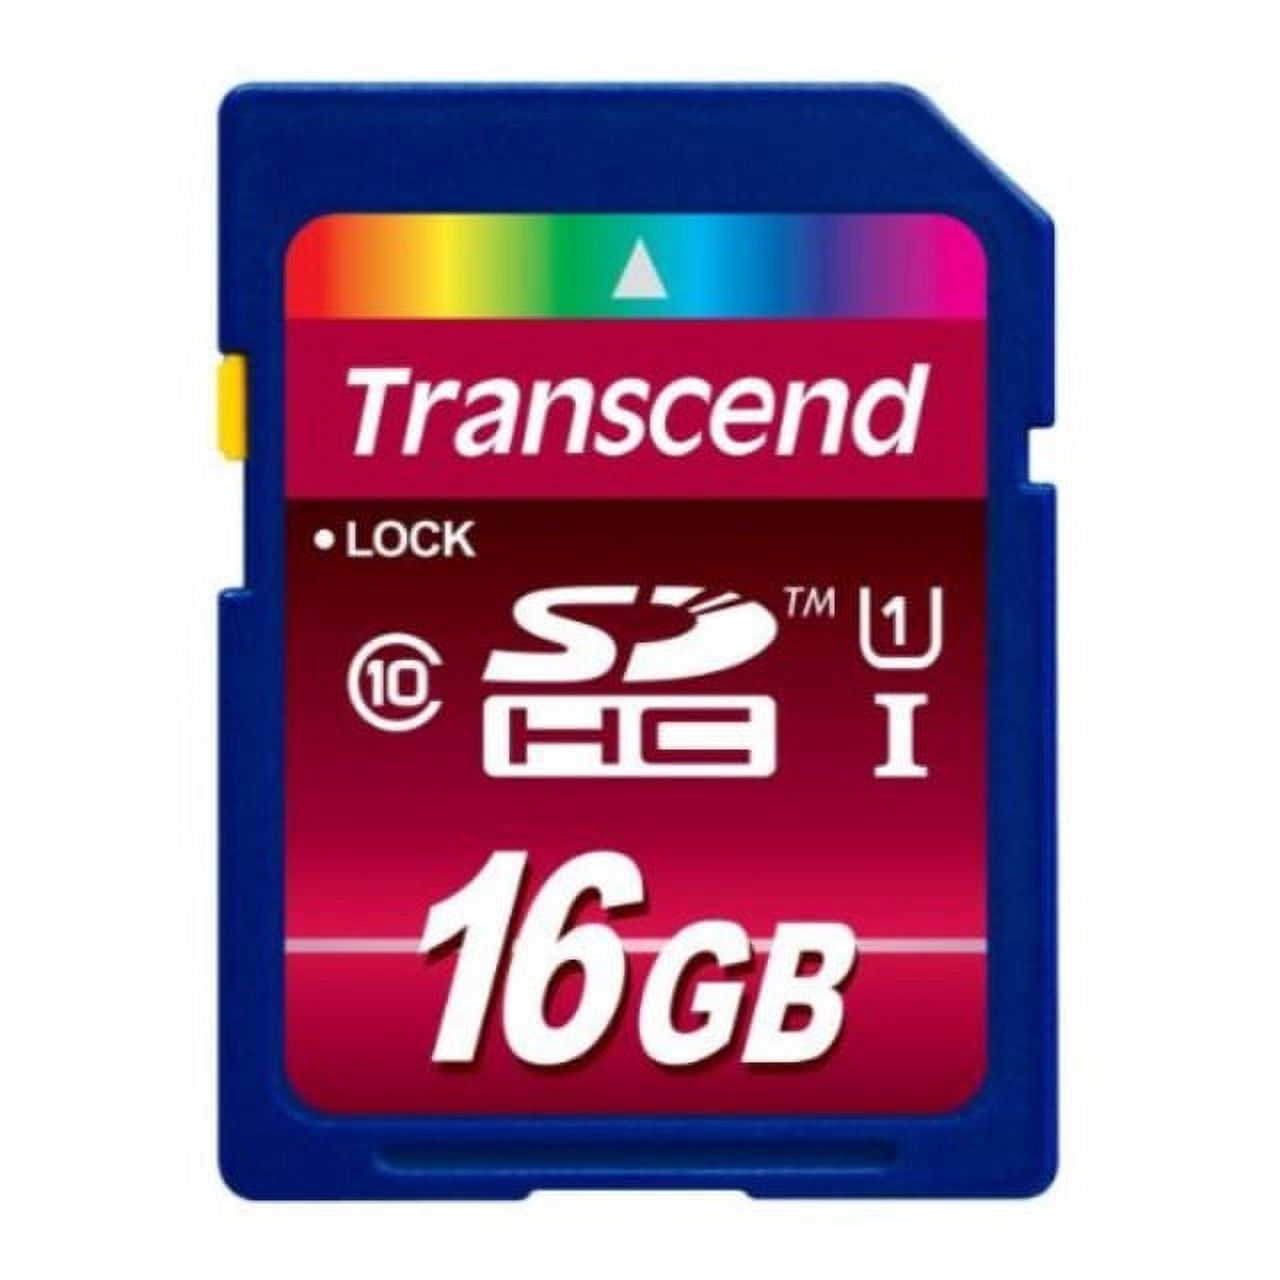 Transcend 16GB SDHC Class 10 UHS-1 Flash Memory Card Up to 90MB/s (TS16GSDHC10U1) - image 1 of 2